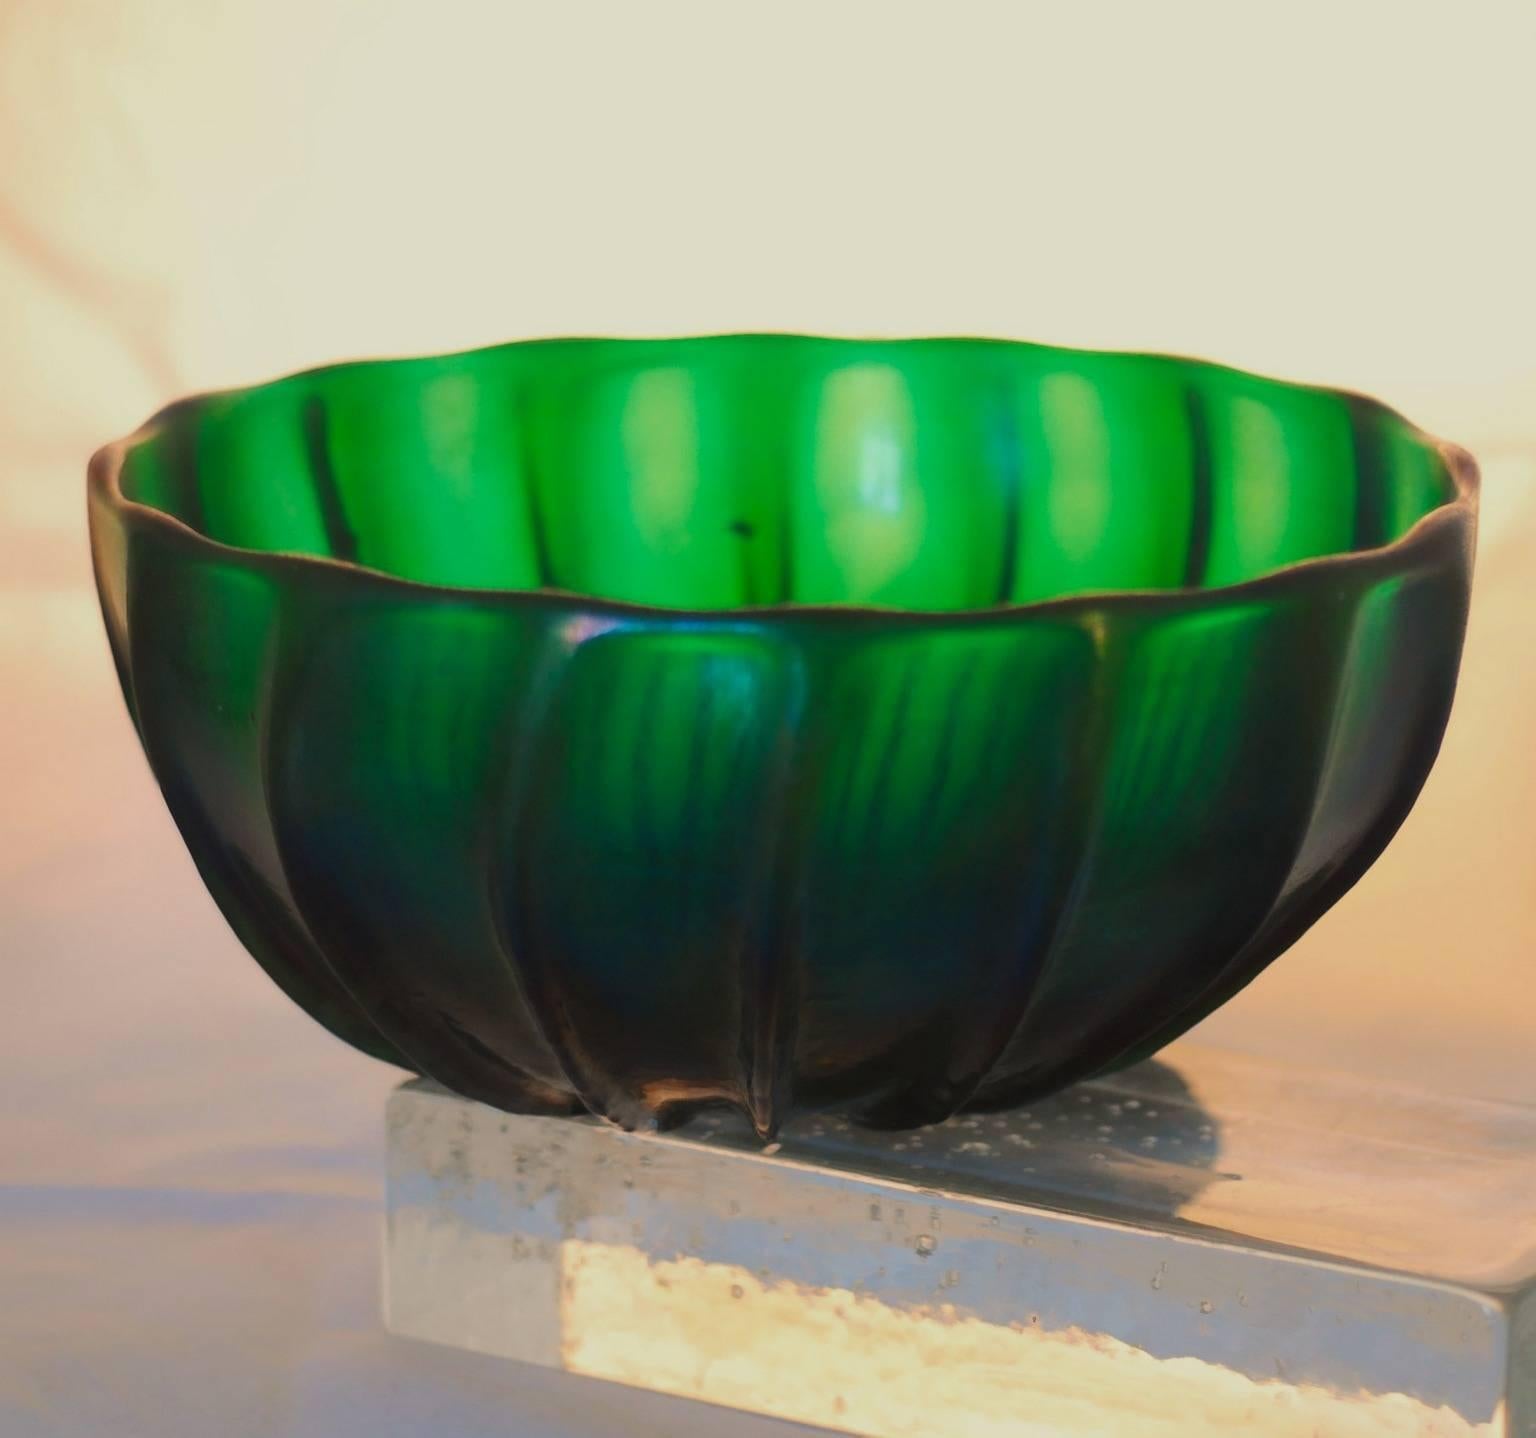 20th Century Archimede Seguso Signed Bowl, Green Glass with Iridescence, Serenella 18 Green For Sale